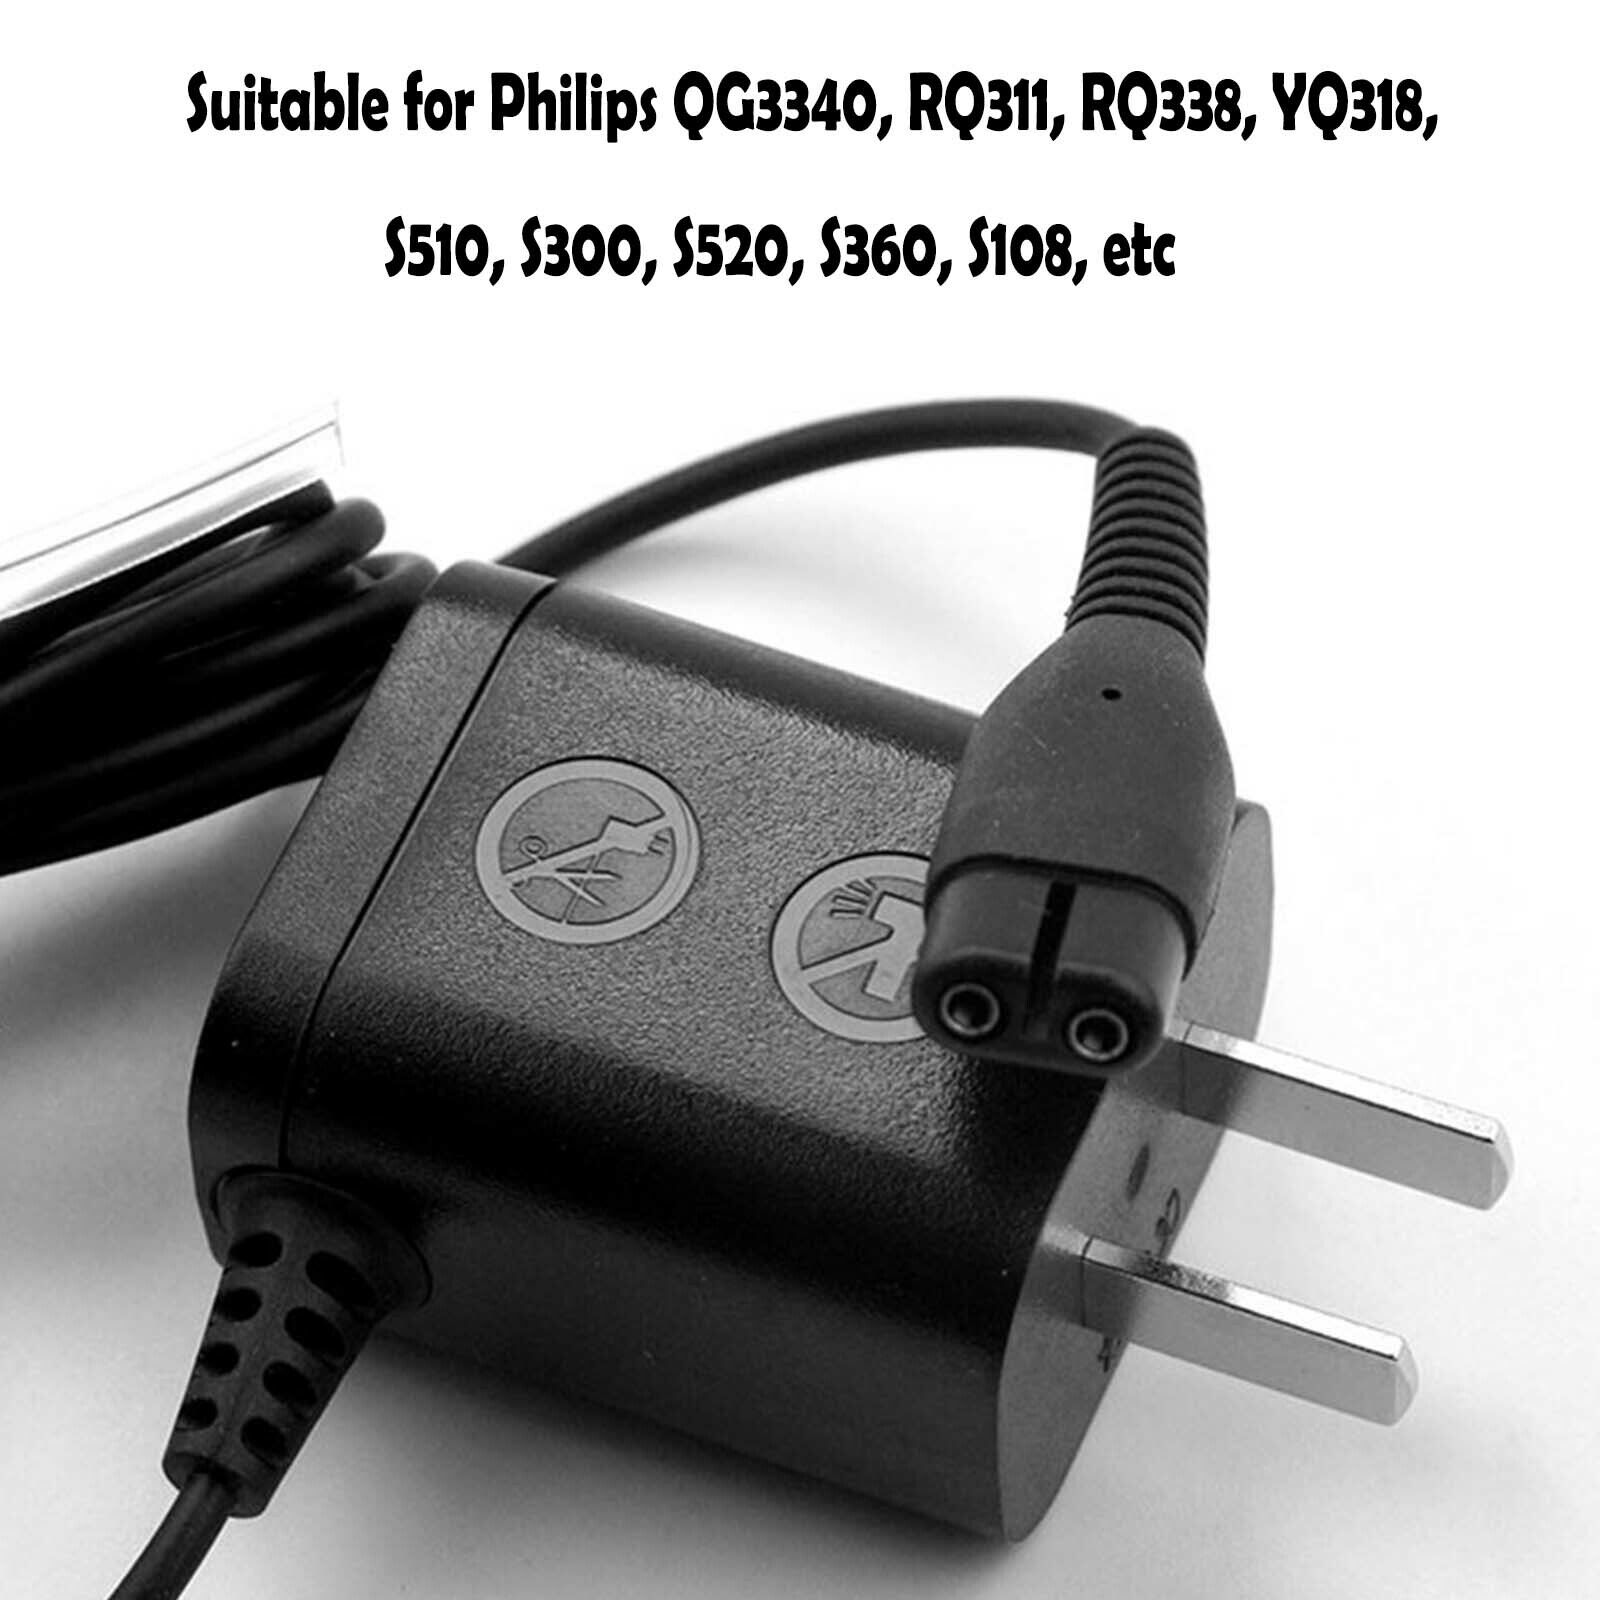 US Plug Power Cord Adapter A00390 for QP2520 S528 S526 S529 Shaver Repair Parts Description: High quality chip, safer